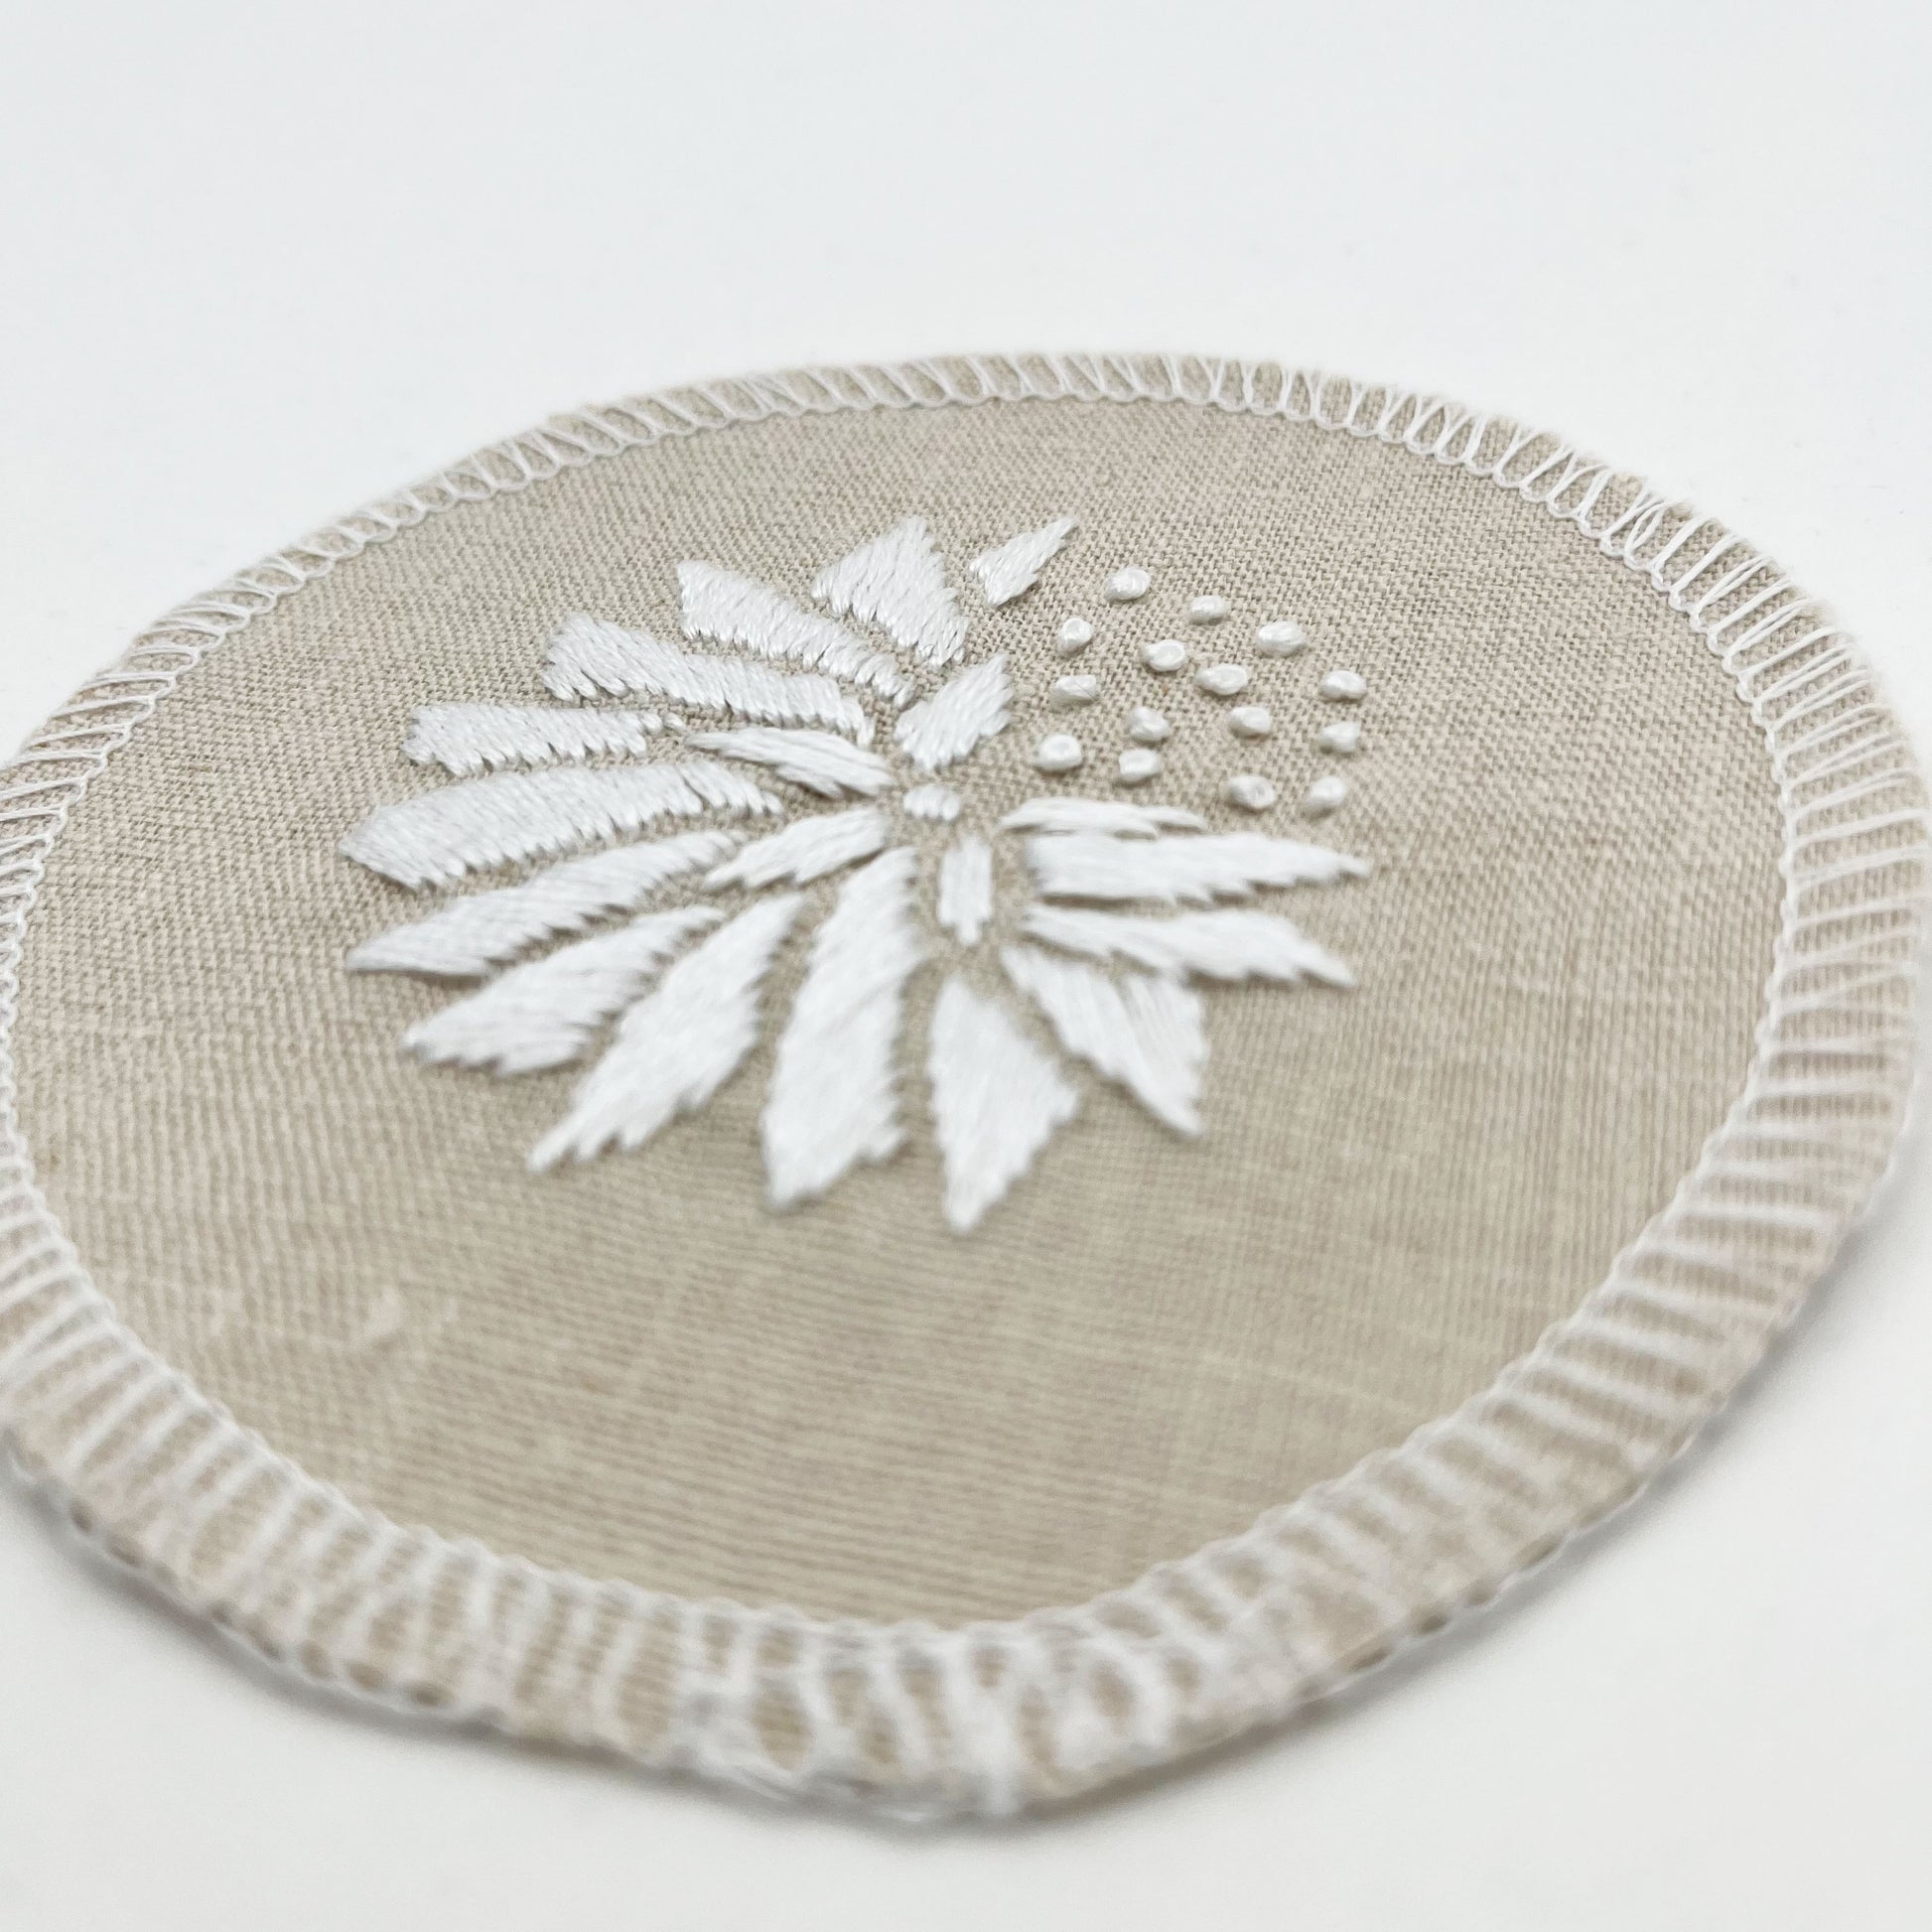 close up angled view of a circle shaped patch made out of natural colored cotton linen fabric, hand embroidered with an abstract dandelion in white colored floss, solid filled petals, edges overlocked in white, on a white background